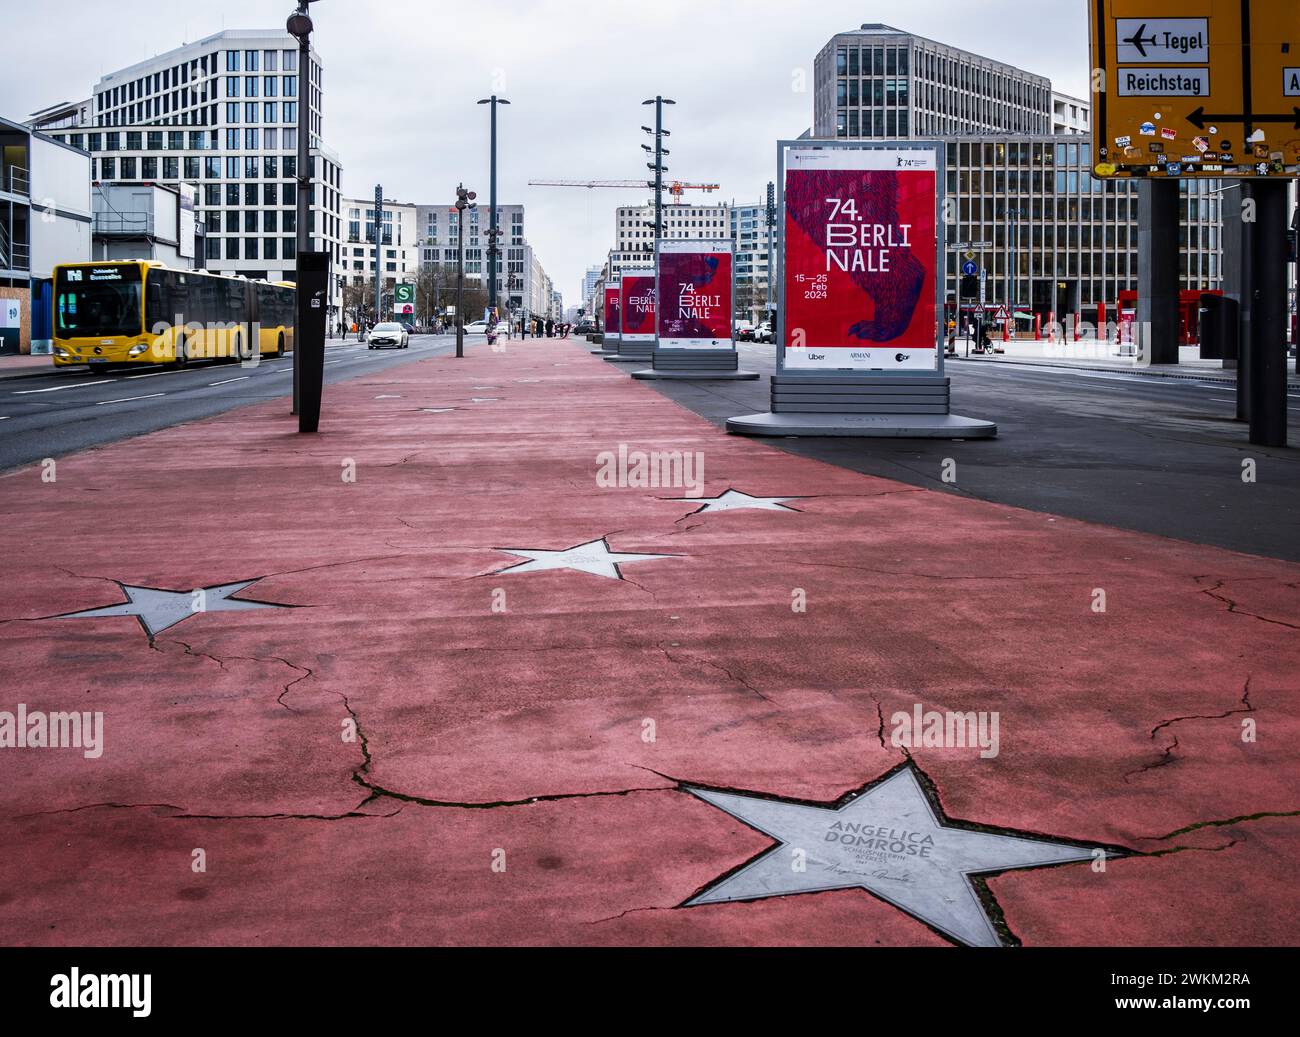 Derelict Boulevard of Stars in central Berlin, German version of the Hollywood Walk of Fame with Berlinale Berlin Film Festival signs Stock Photo